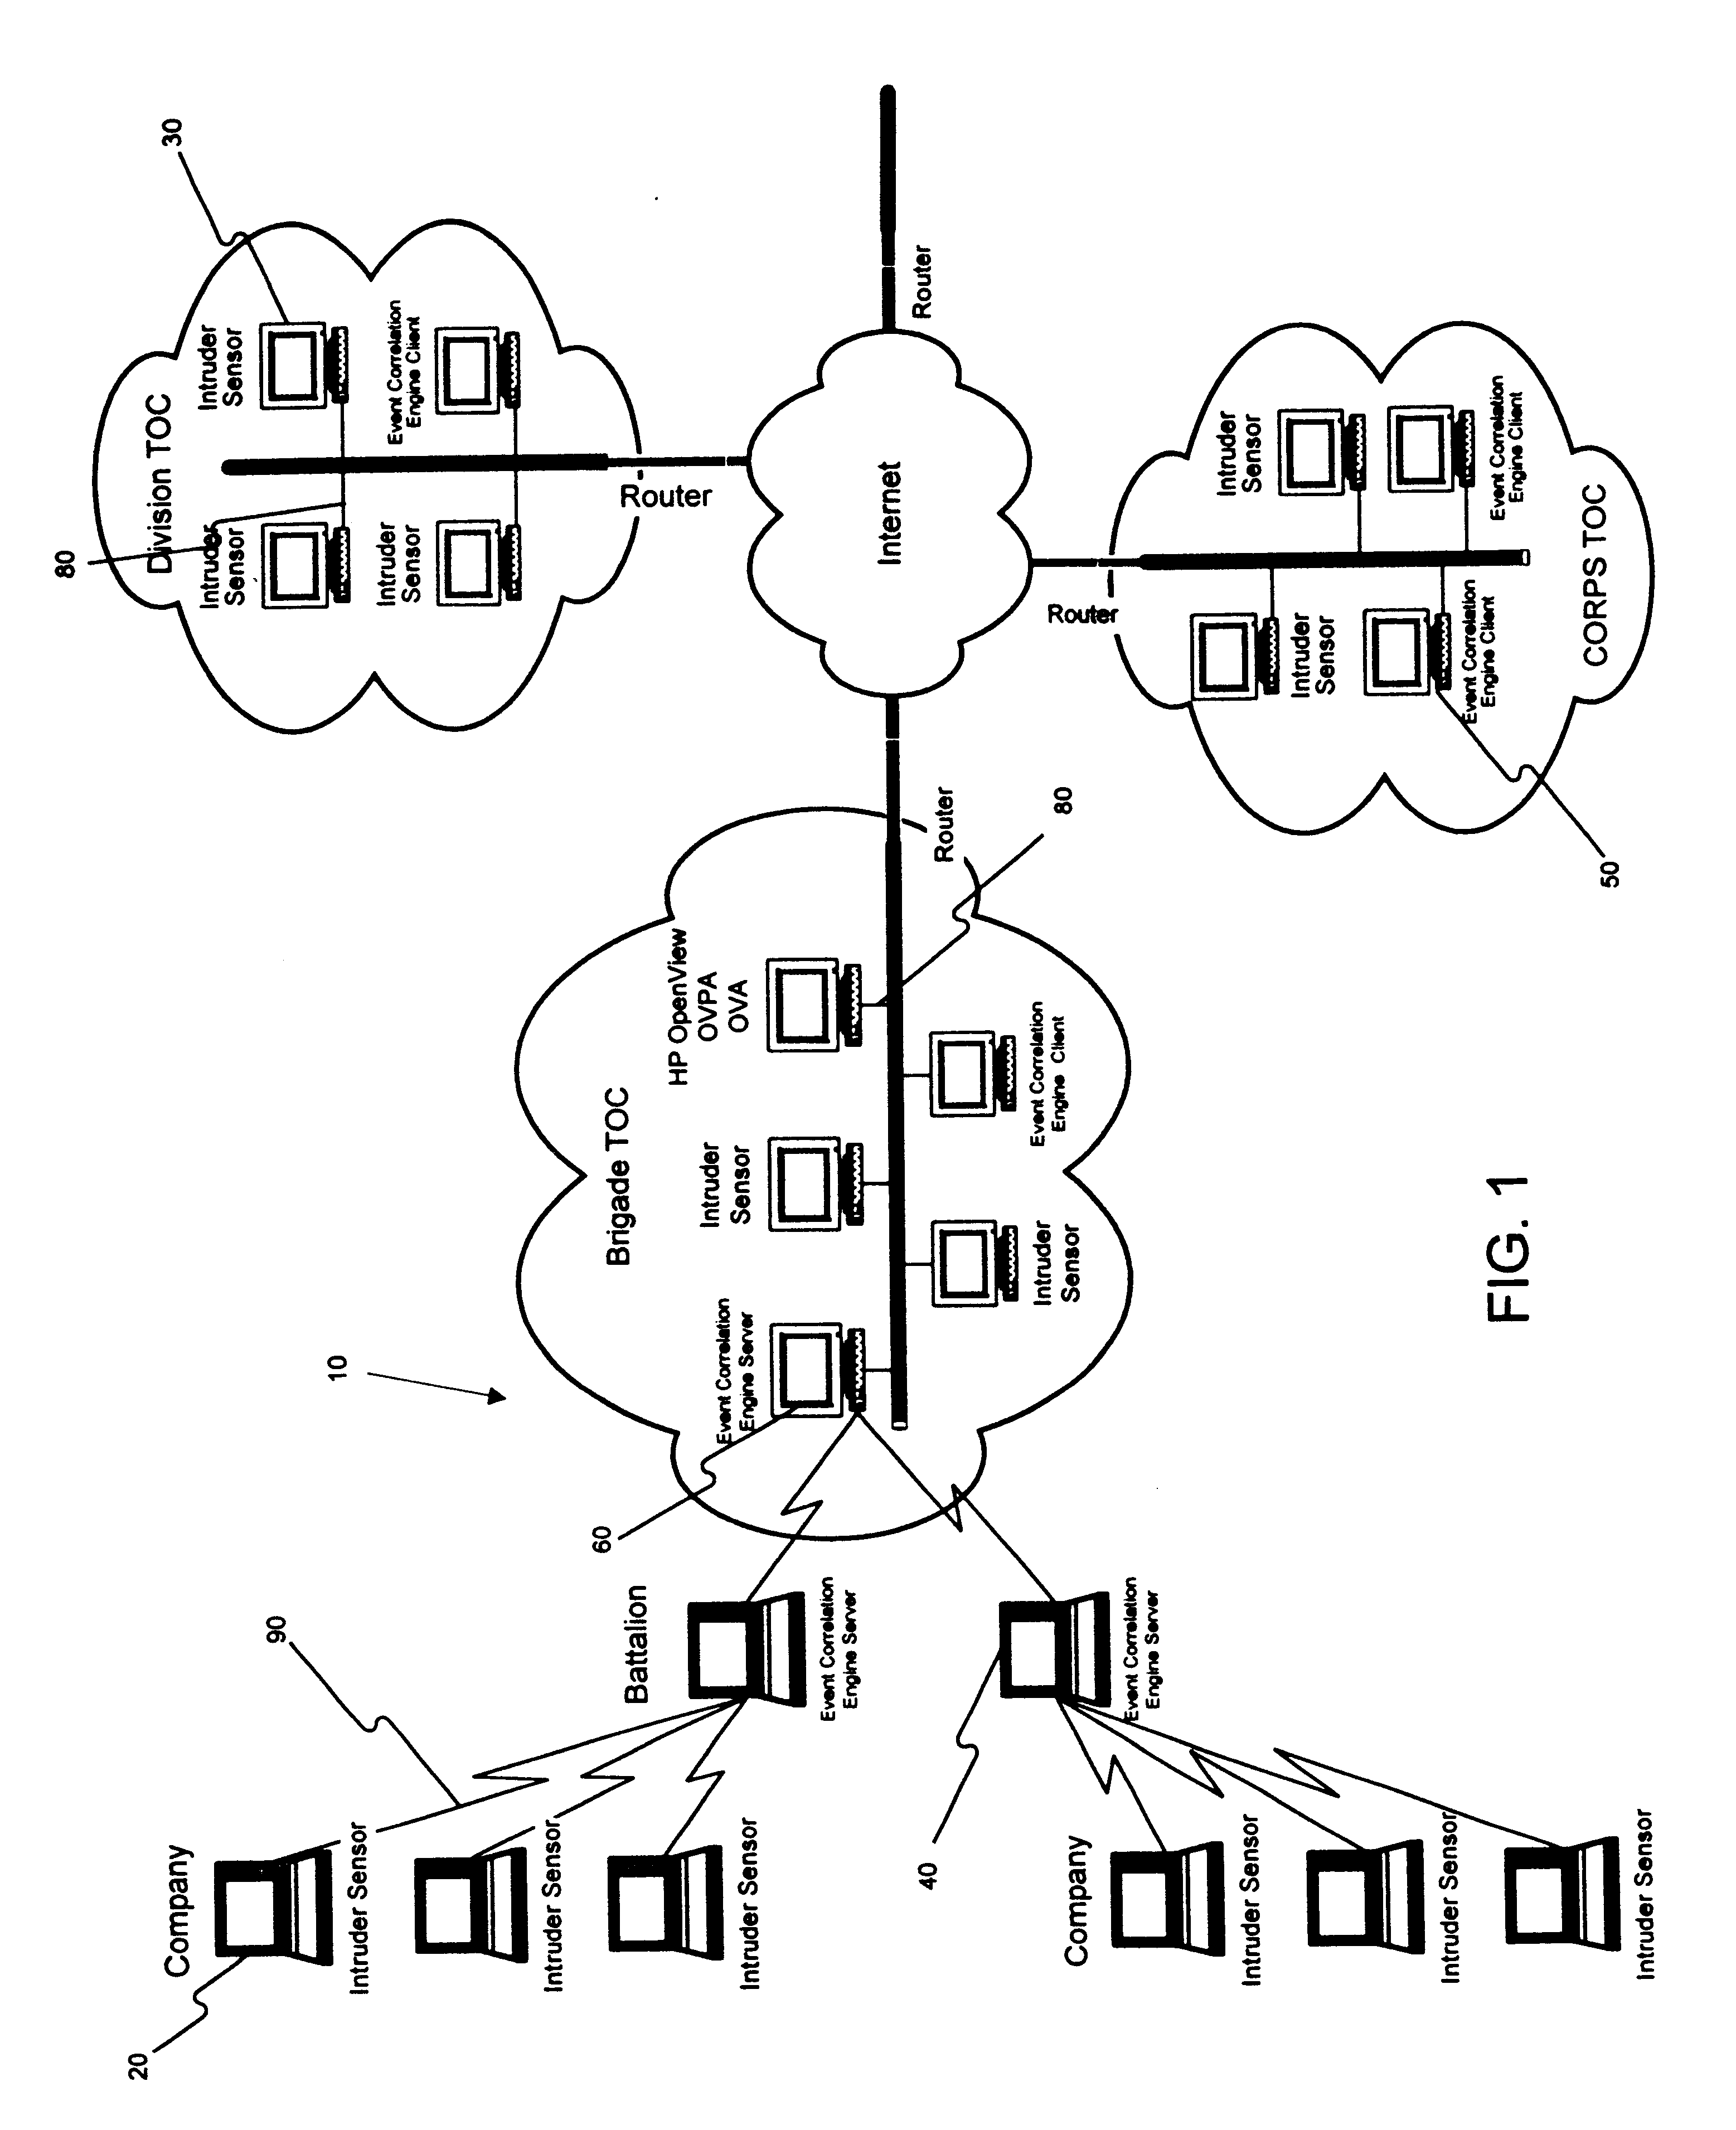 Method and apparatus for an intruder detection reporting and response system